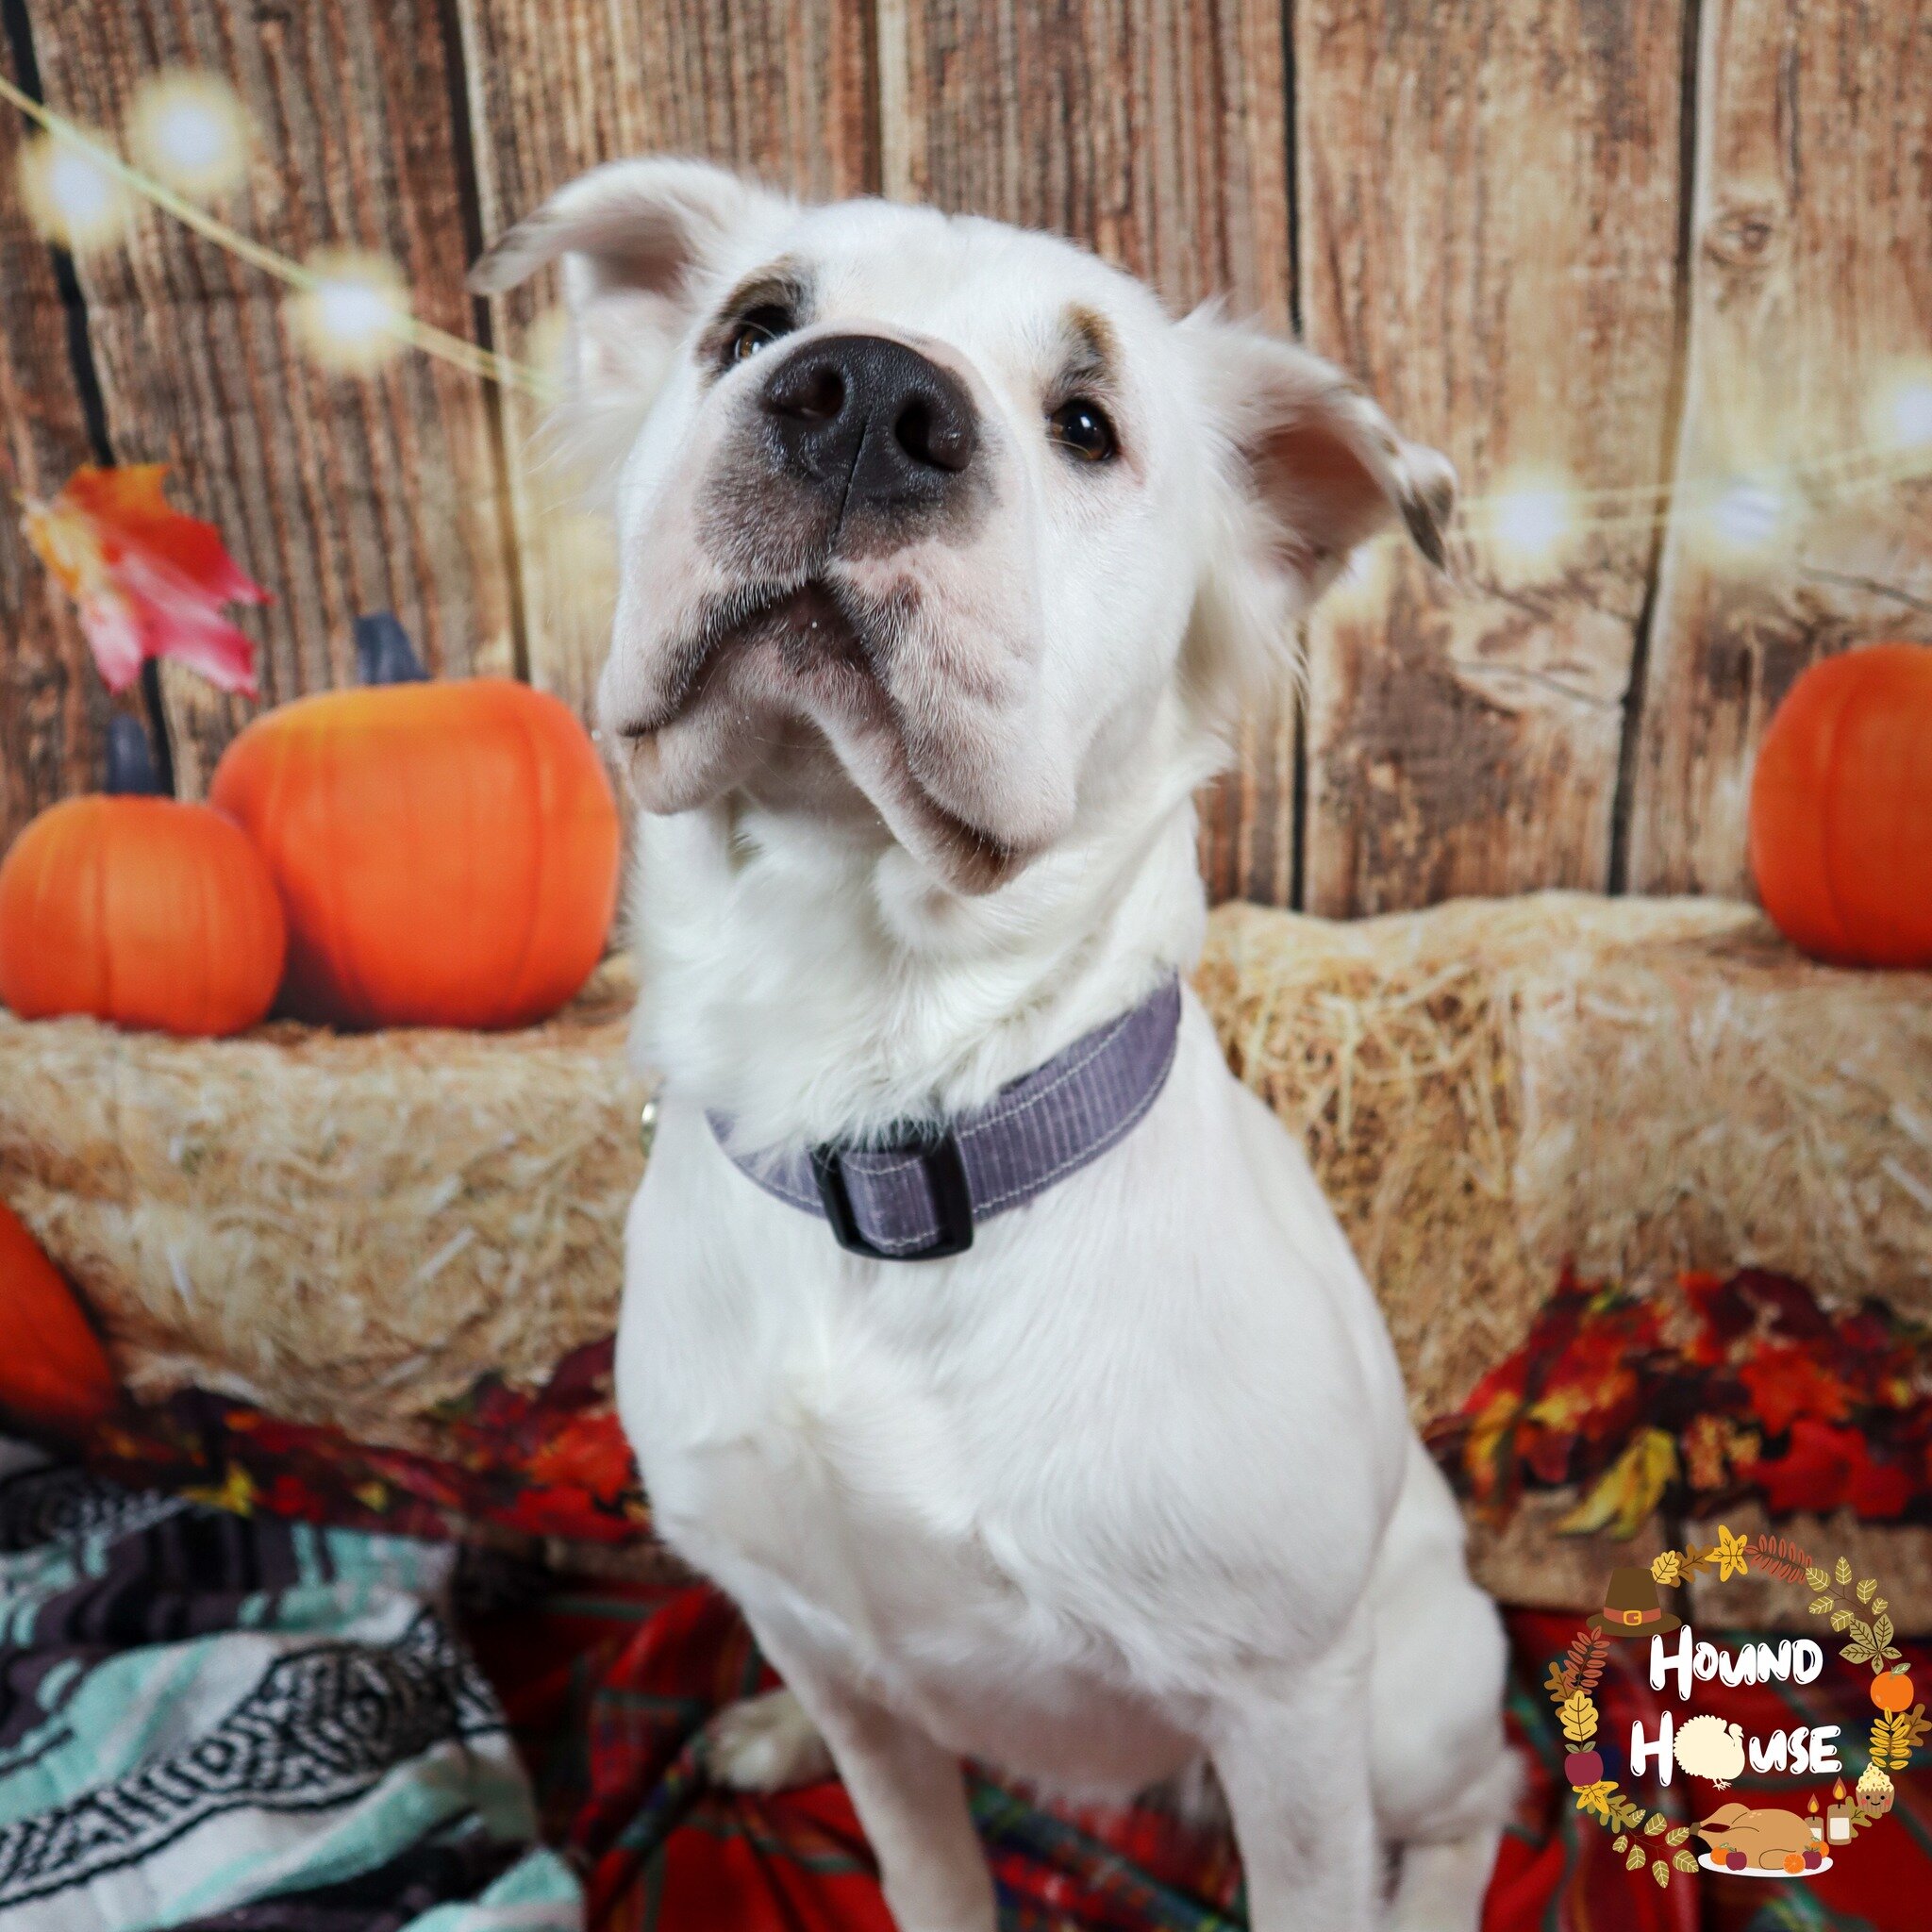 Some pics from our Fall Shoot today! Full album will be uploaded to Facebook shortly!

 #HHLVFamily #VegasStrong #dogslife #dogsofinstagram #dogoftheday #bestoflasvegas #doggiedaycare #vegas #dogsofinsta #dogdaycare #smallbusiness #houndhouselv #dogs